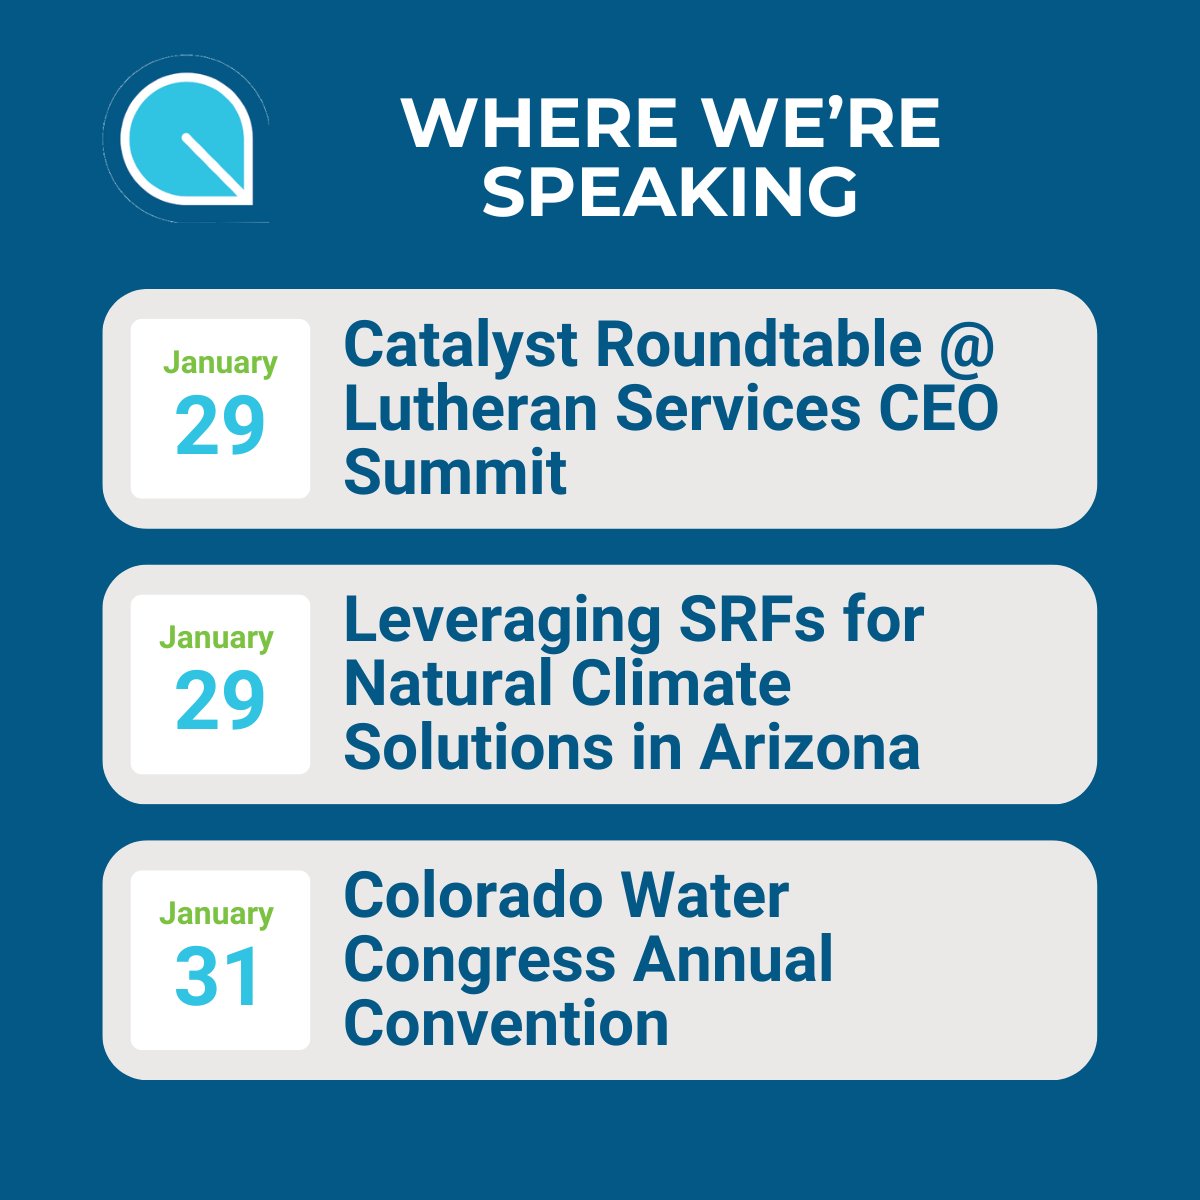 Our team is gearing up for several events next week with @LutheranSvcs, @cowatercongress and more! Get all the information on these upcoming events here: quantifiedventures.com/speaking-engag…